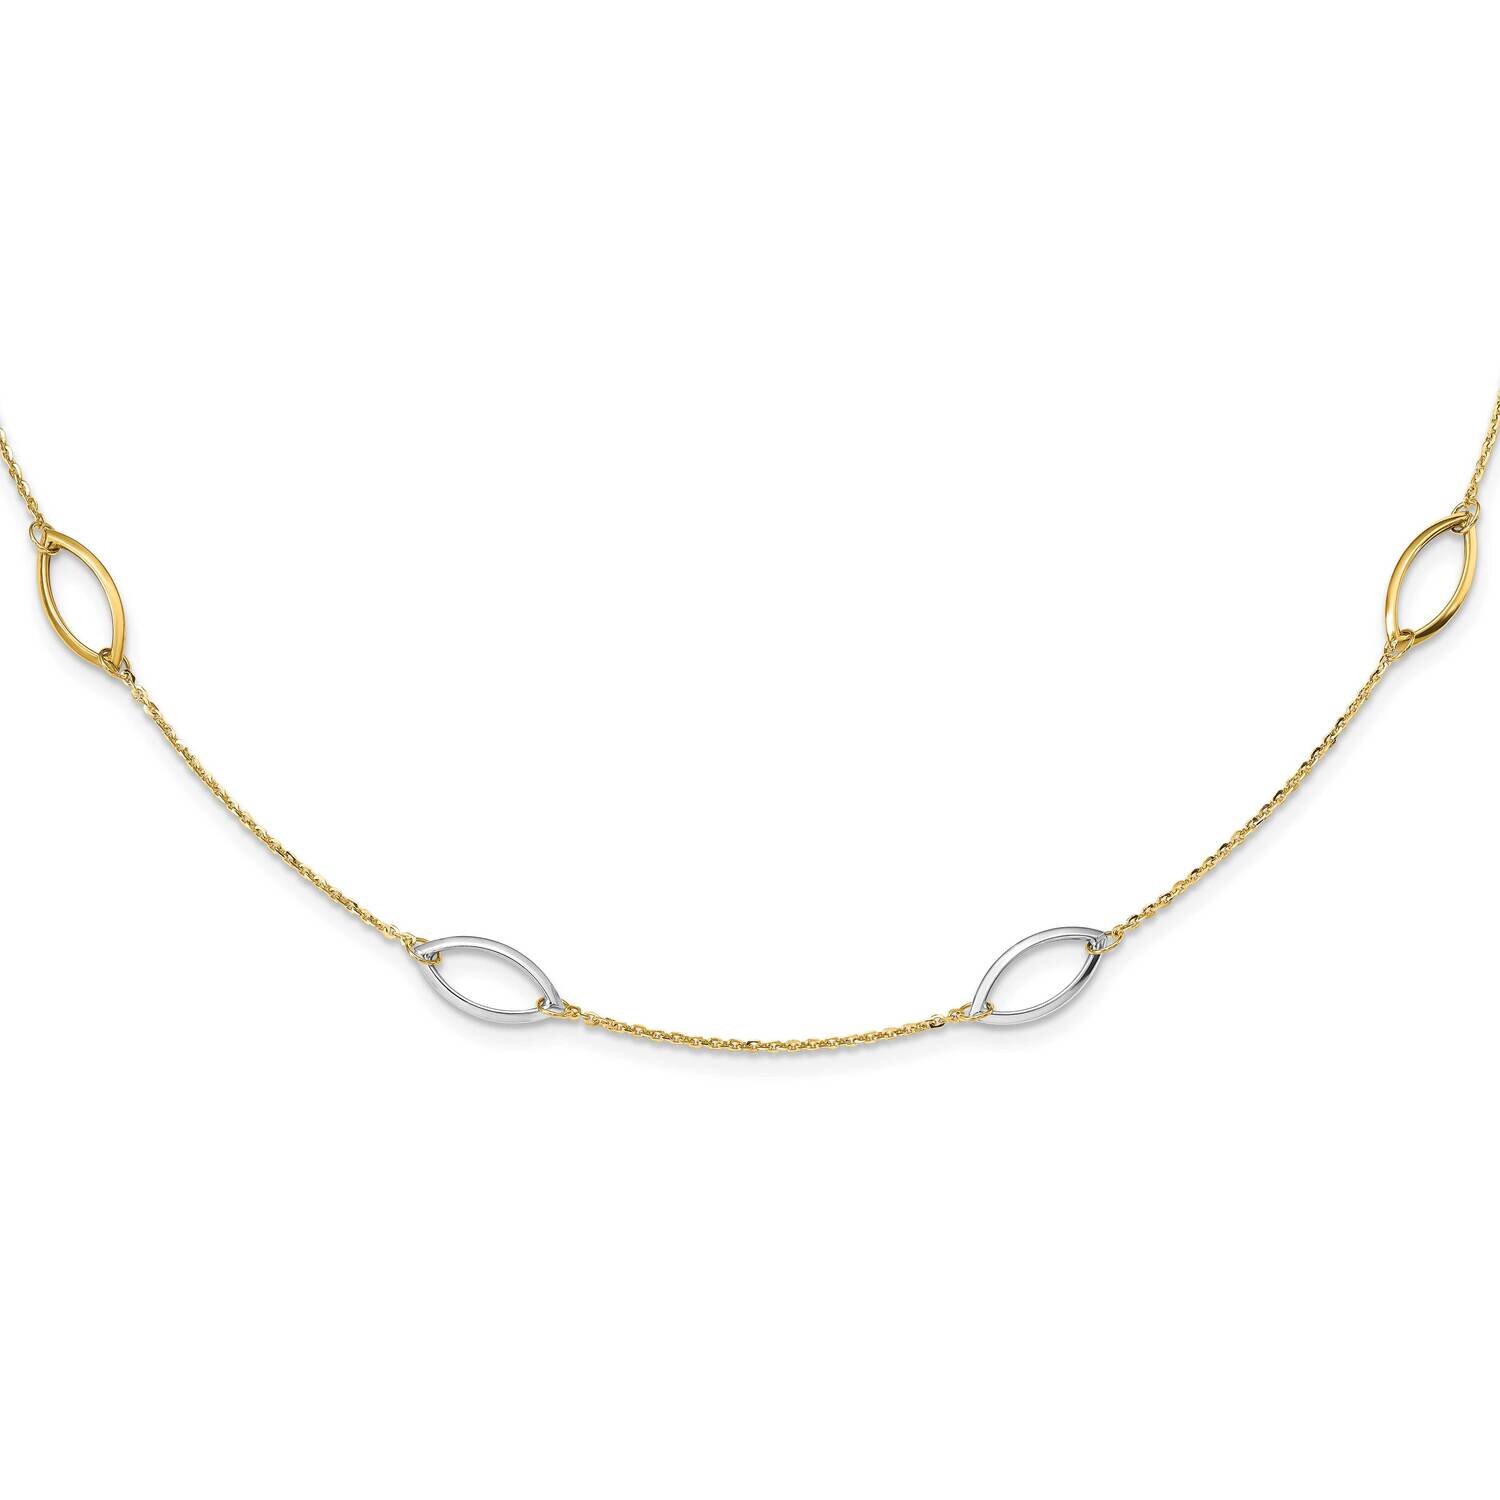 Fancy Link Necklace 31.5 Inch 14k Two-Tone Gold SF2854-31.5